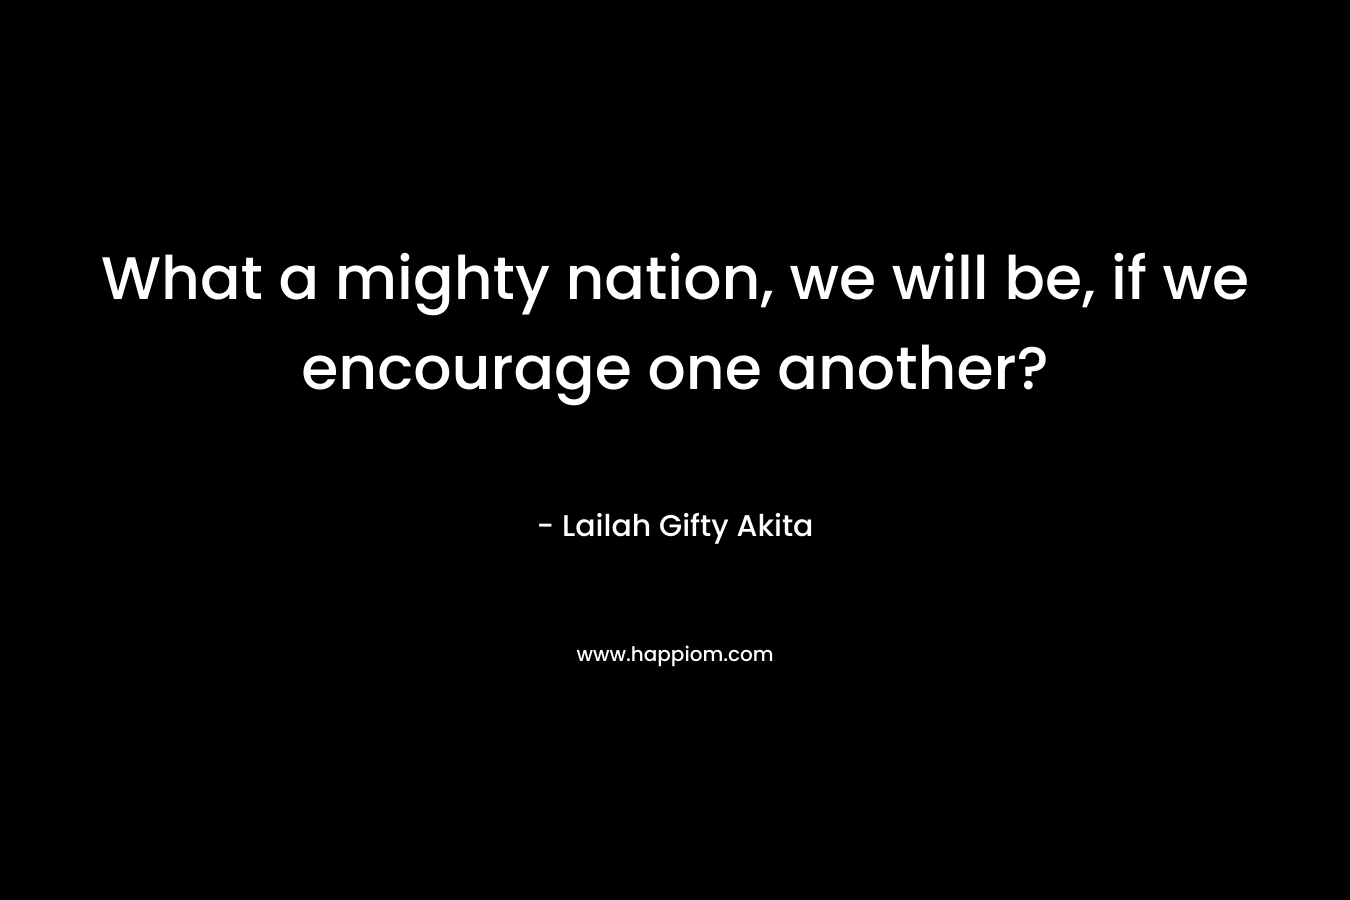 What a mighty nation, we will be, if we encourage one another?